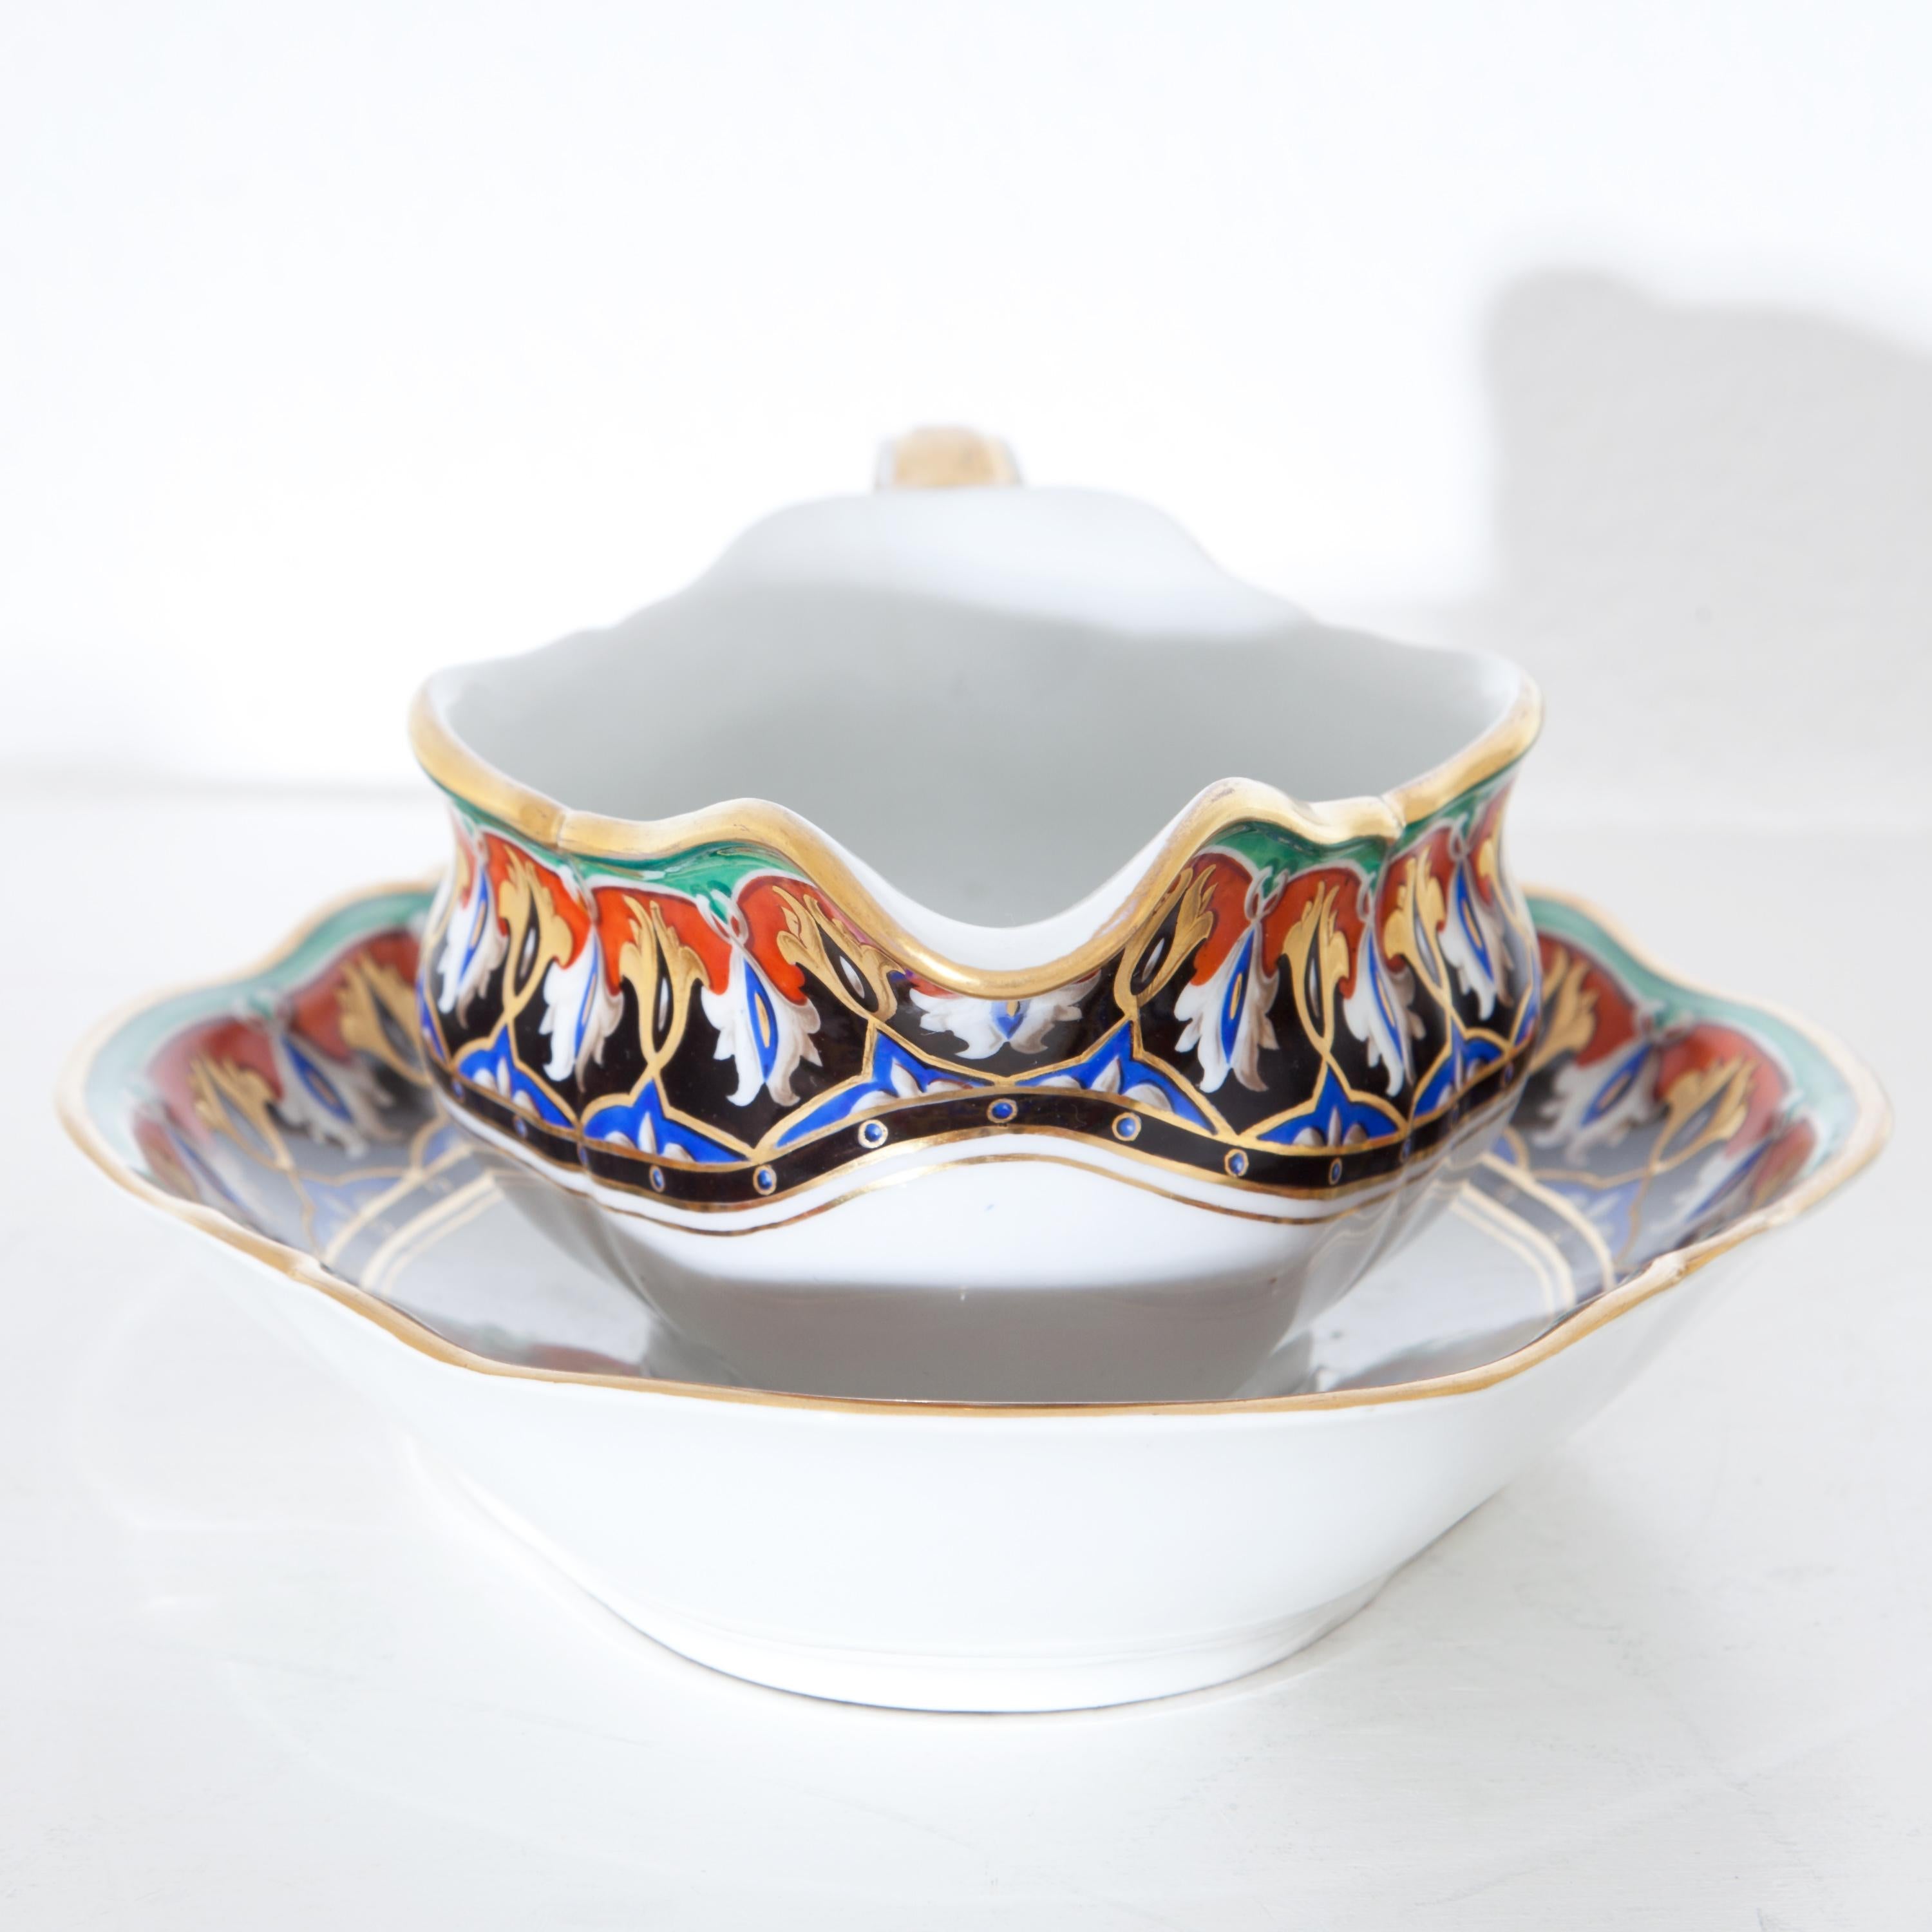 Porcelain Gravy Boat and Spoon with Monogram WA, KPM, Berlin, Germany, 1849-1870 For Sale 2